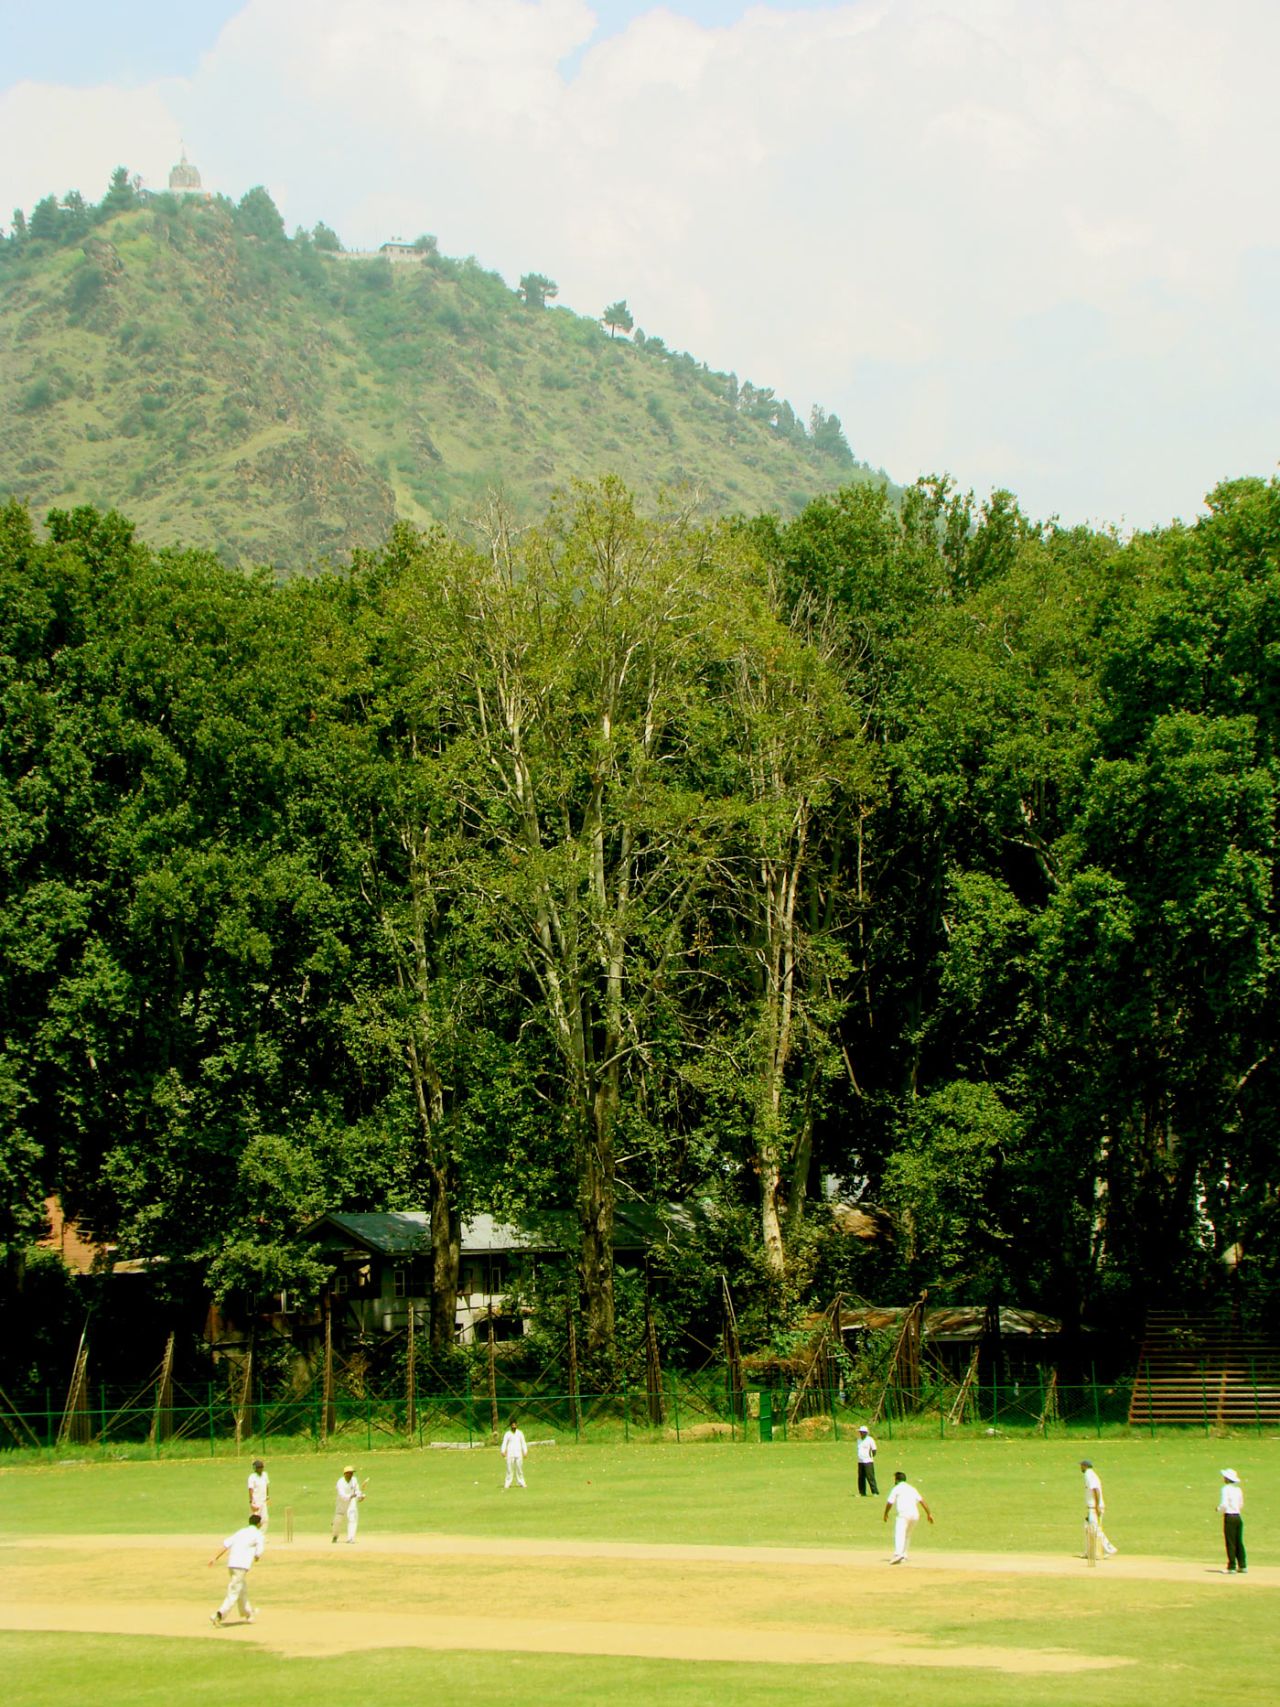 A districts selection trial match at the Sher-i-Kashmir Stadium in Srinagar, August 22, 2014